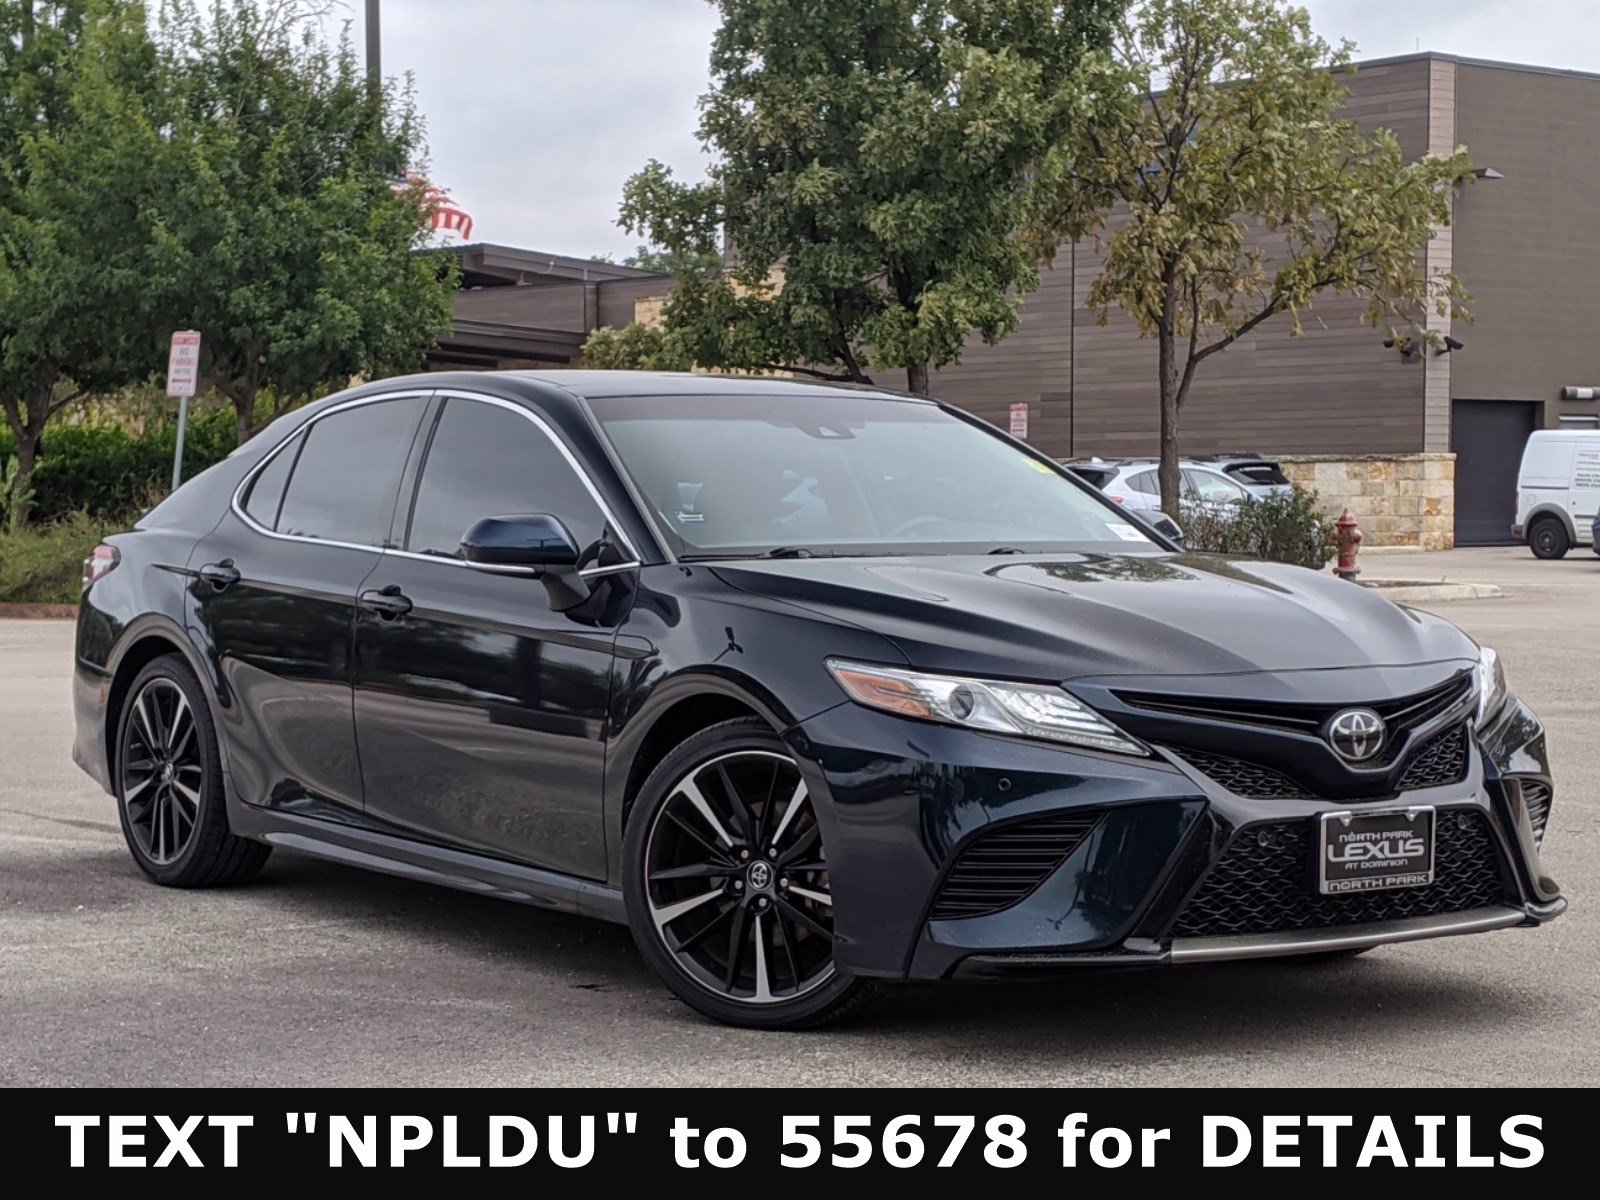 PreOwned 2018 Toyota Camry XSE V6 4dr Car in San Antonio